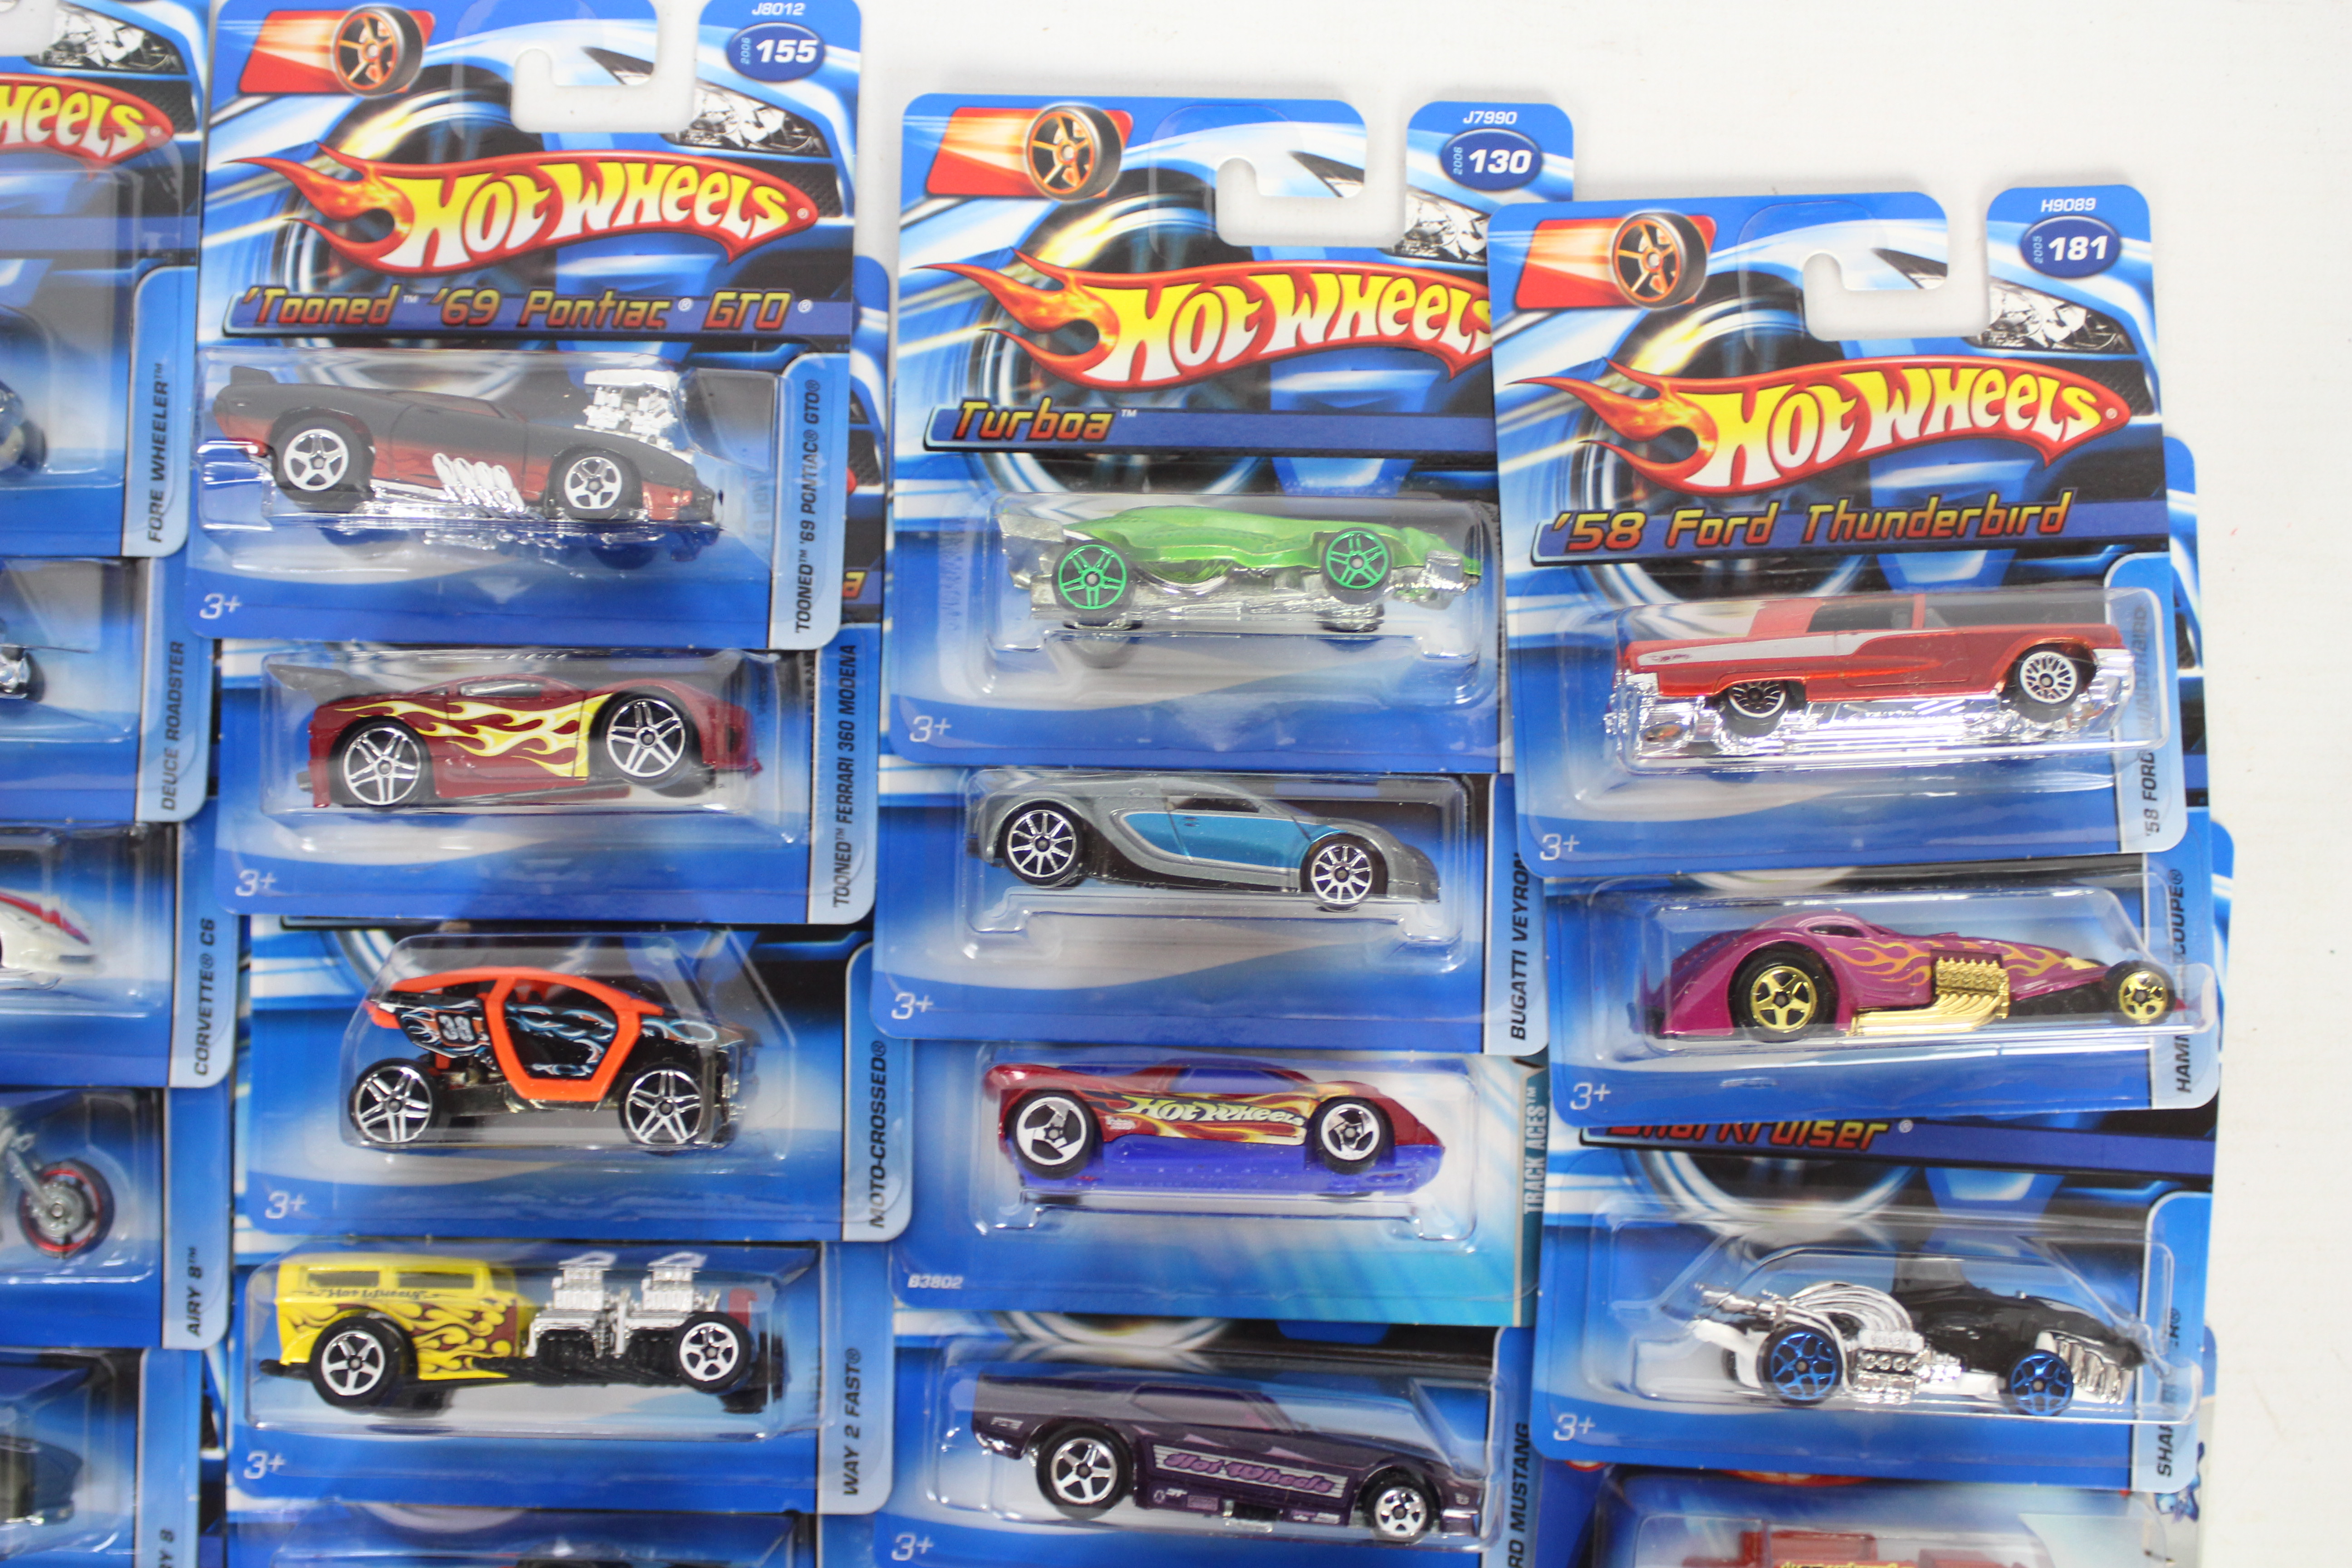 Hot Wheels - 50 x unopened carded models from the mid 2000's including Bugatti Veyron # J8000, - Image 3 of 3